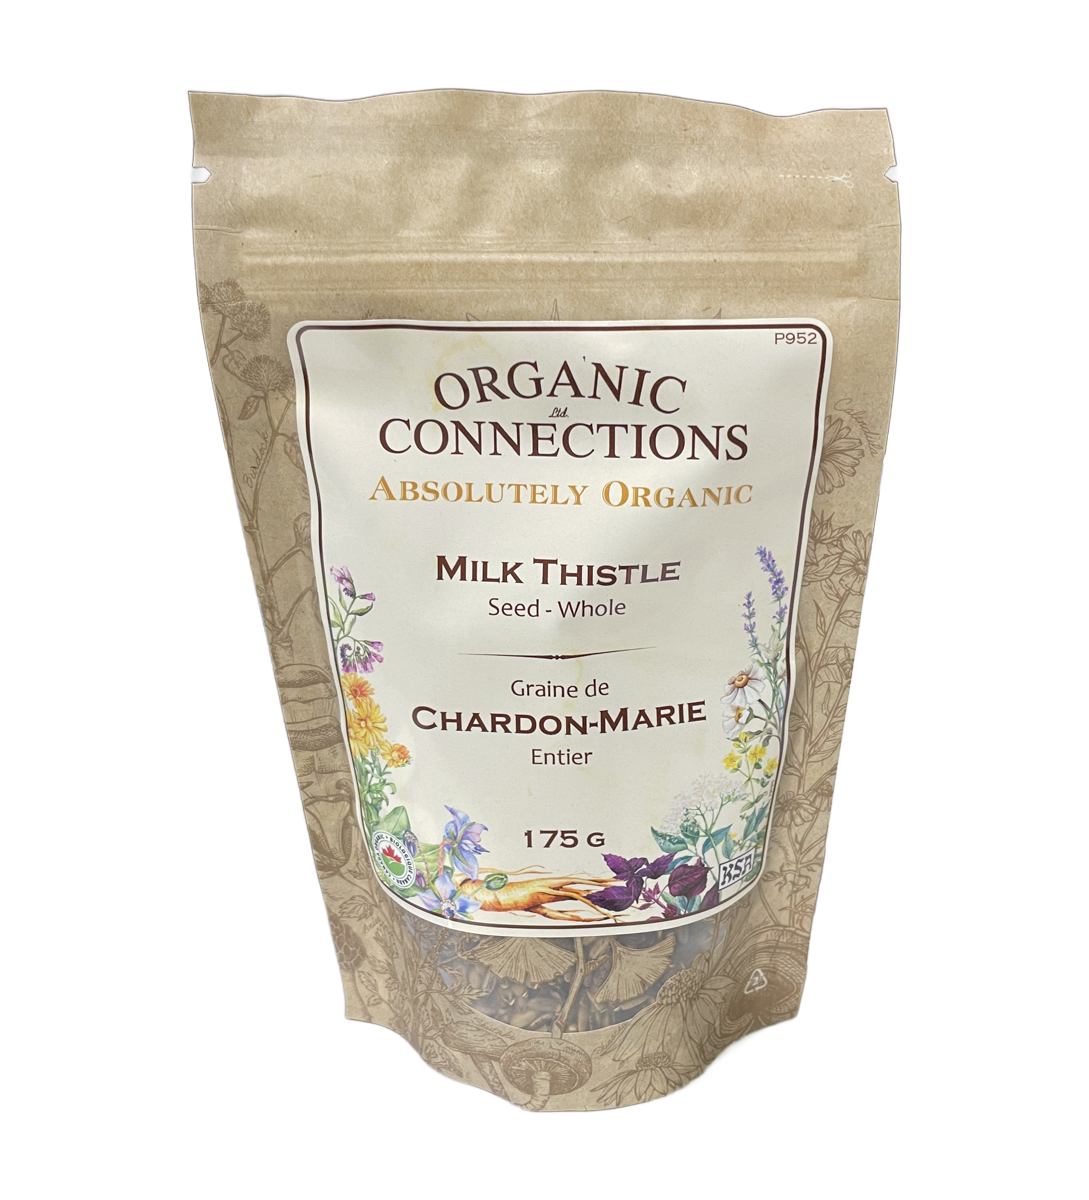 Organic Connections Organic Milk Thistle Seed Whole 175g